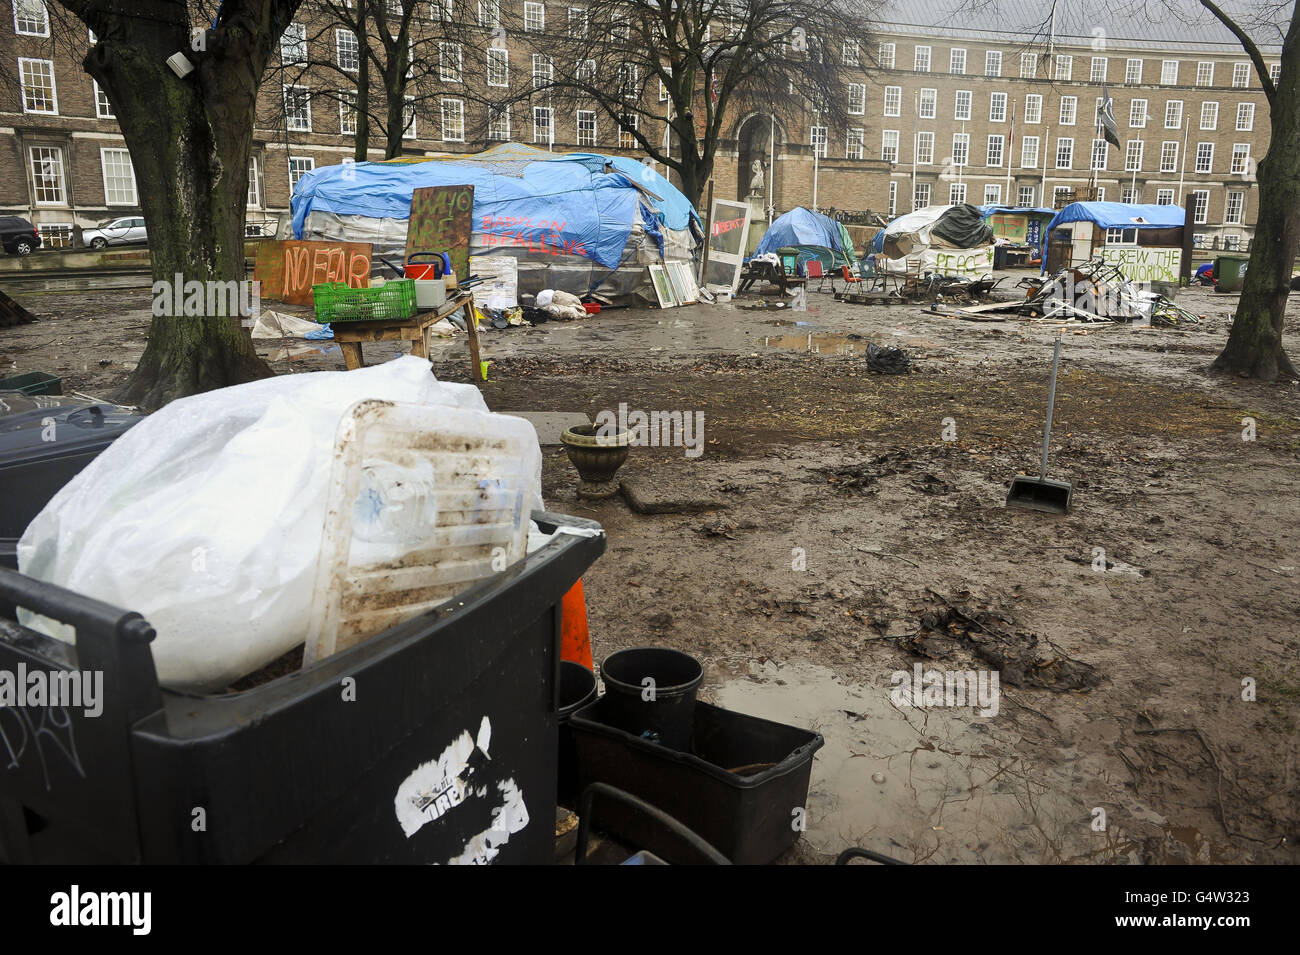 Mud, rubbish and tarpaulin structures litter College Green, Bristol, where the Occupy Bristol movement have been camped since October 2011. Stock Photo